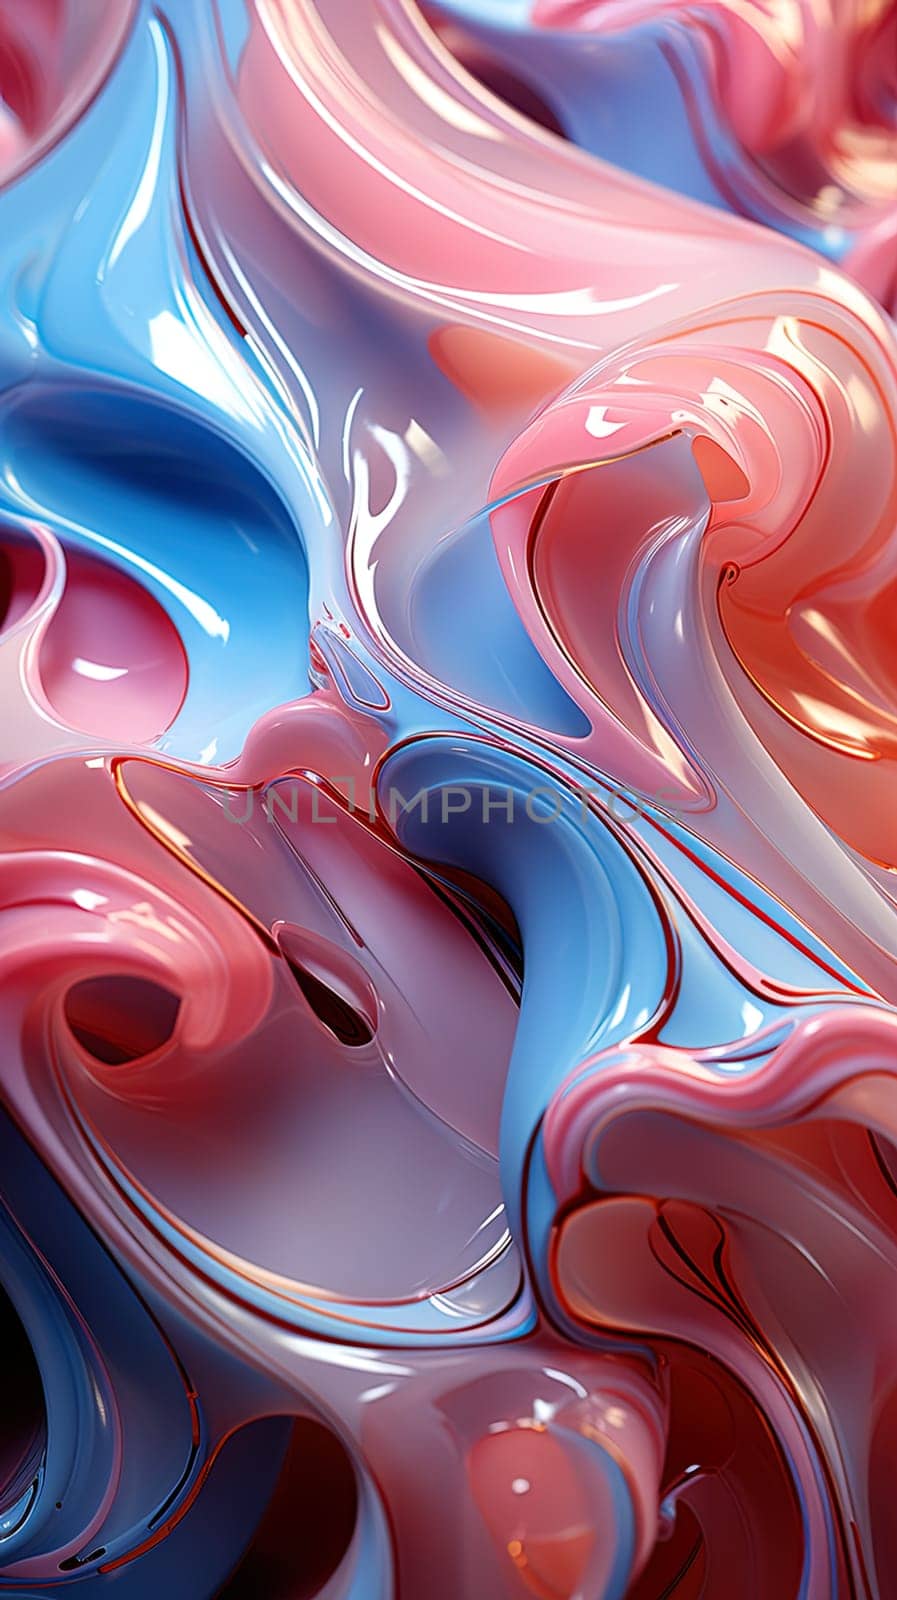 Liquid abstract pink and blue background with drops by Dustick